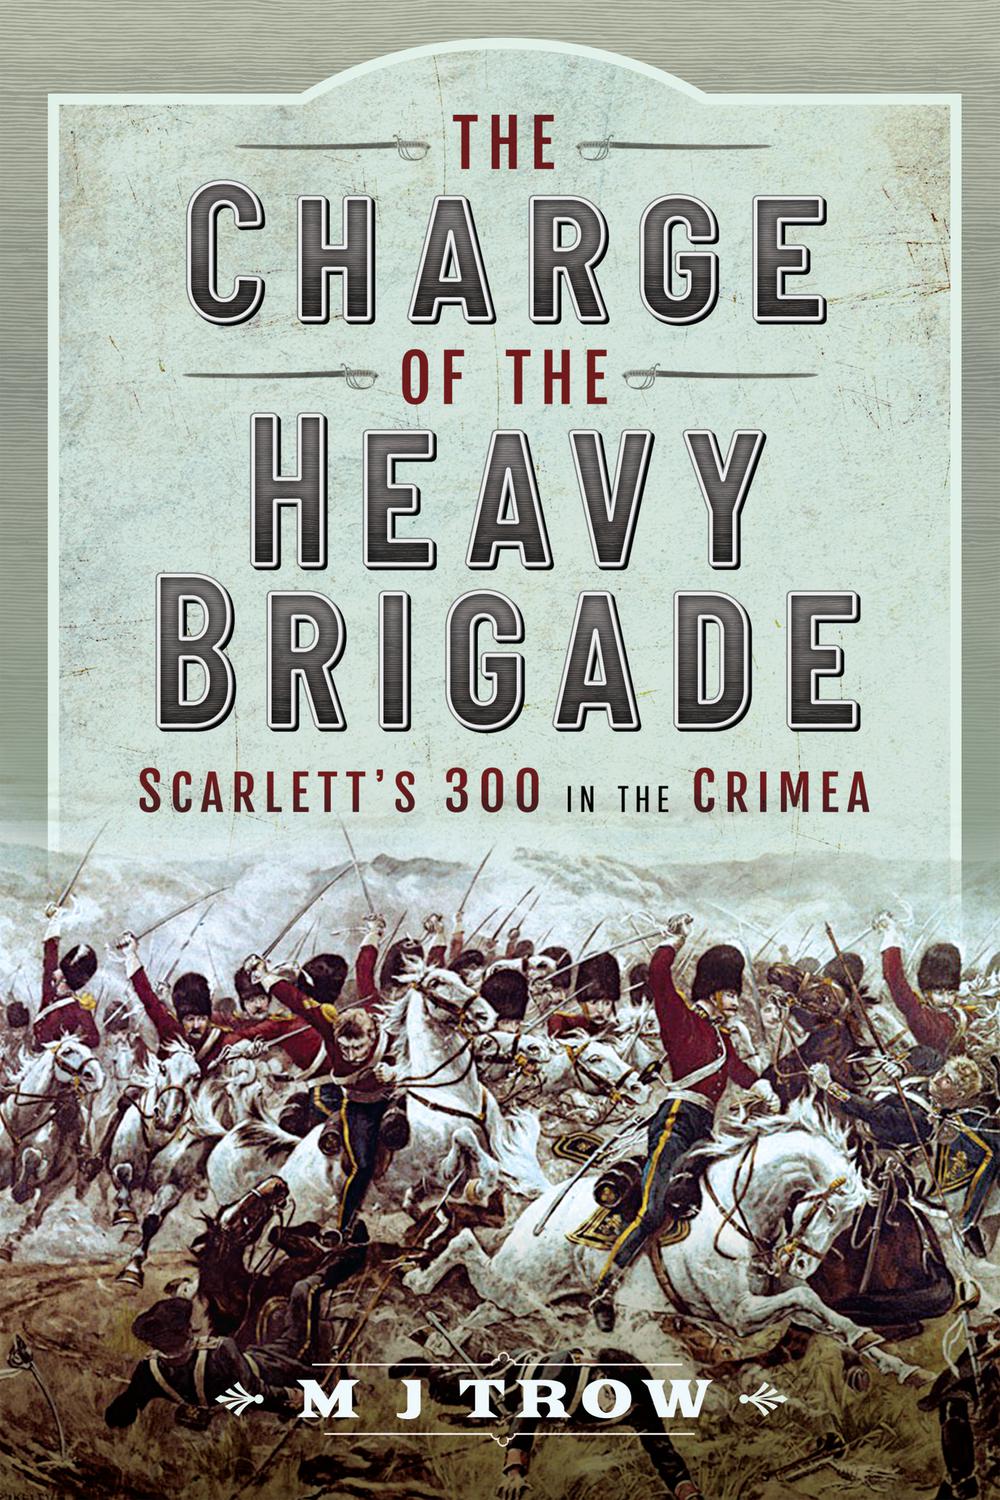 The Charge of the Heavy Brigade - M J Trow